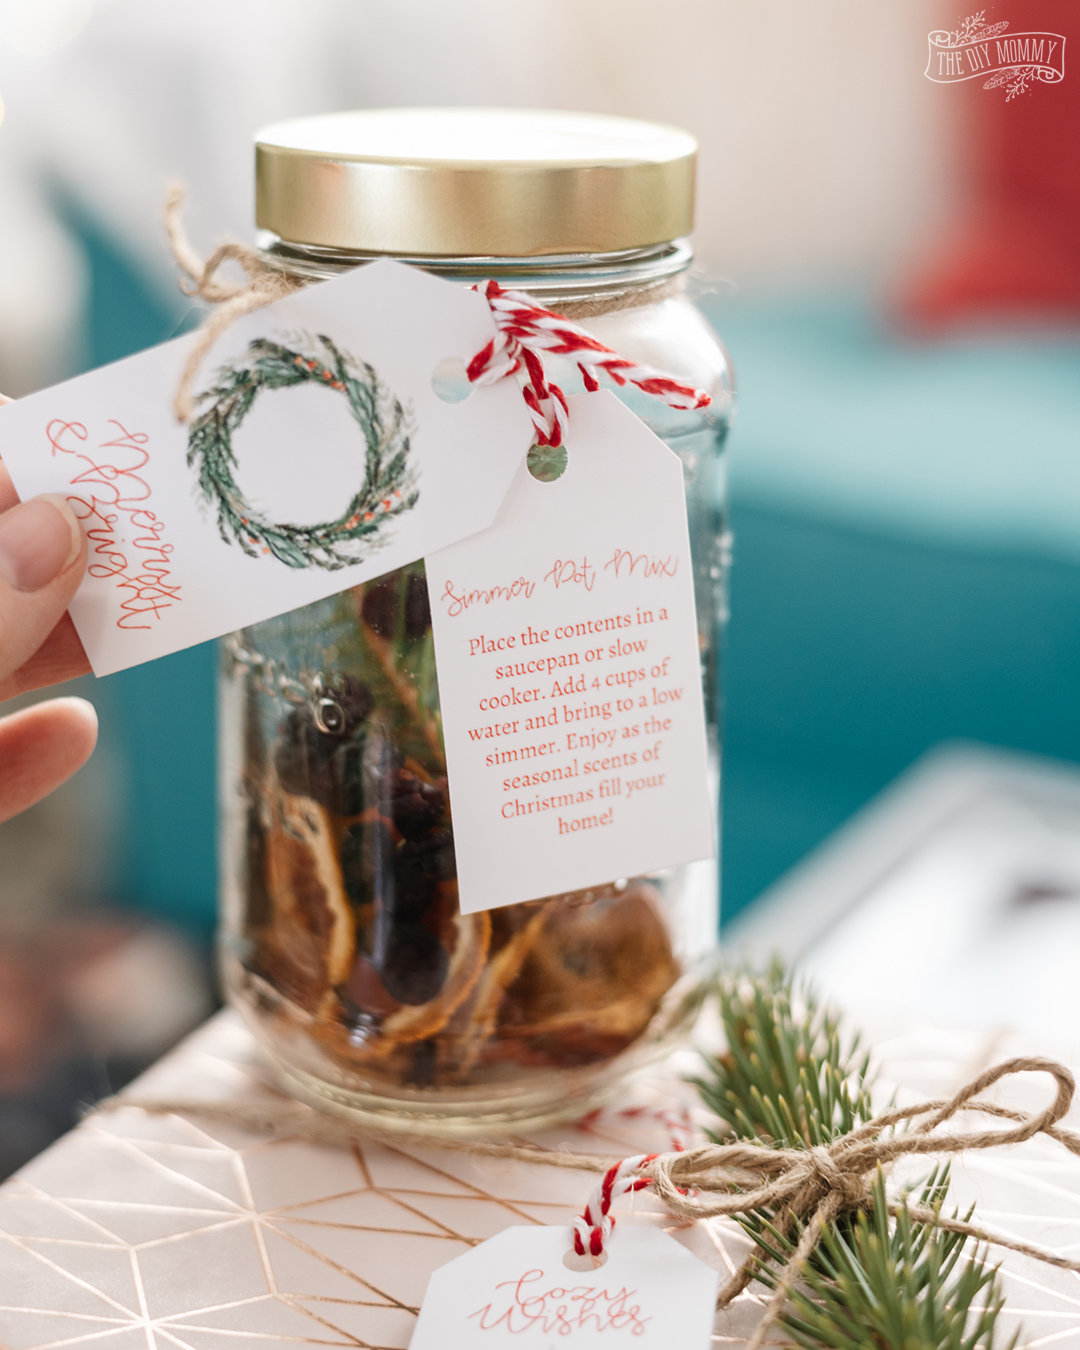 Easy and budget friendly simmer pot mix gift idea - simply add dried fruit, spices and greenery and some handmade tags!